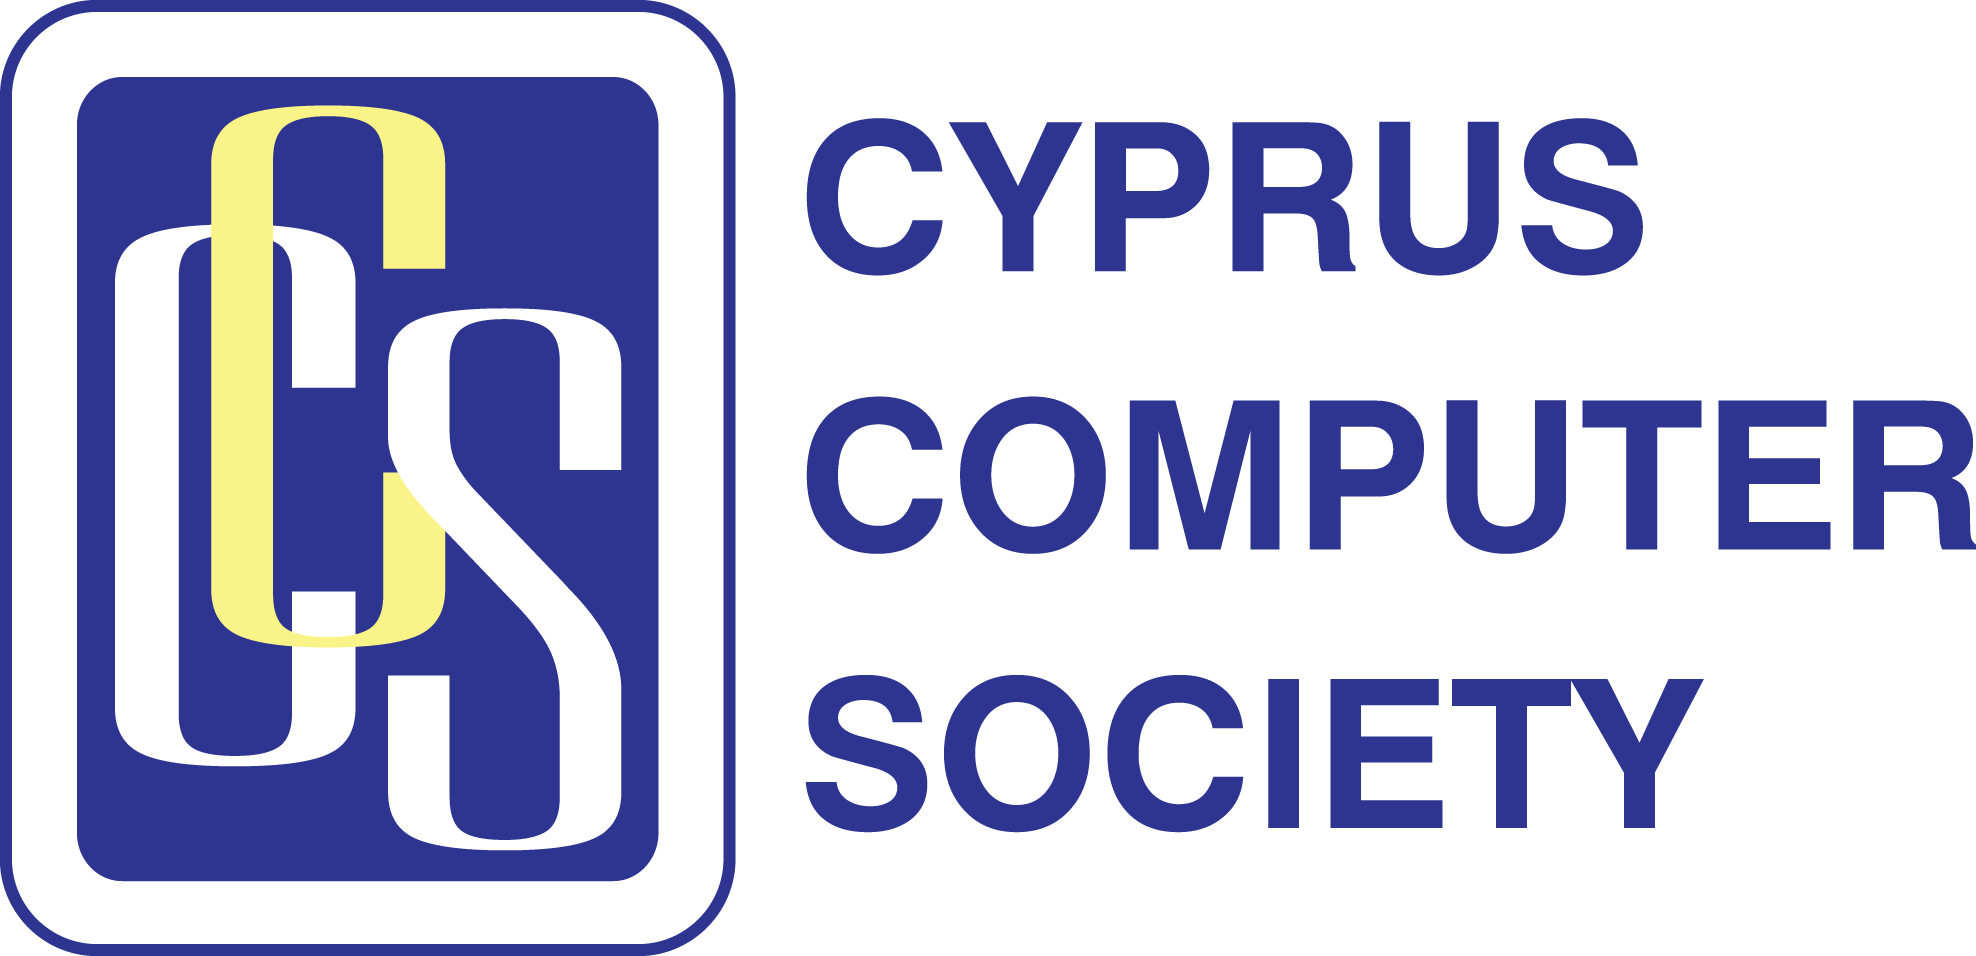 Cyprus Computer Society Logo (CCS.org.cy) in Color George Michael bytefreaks.net